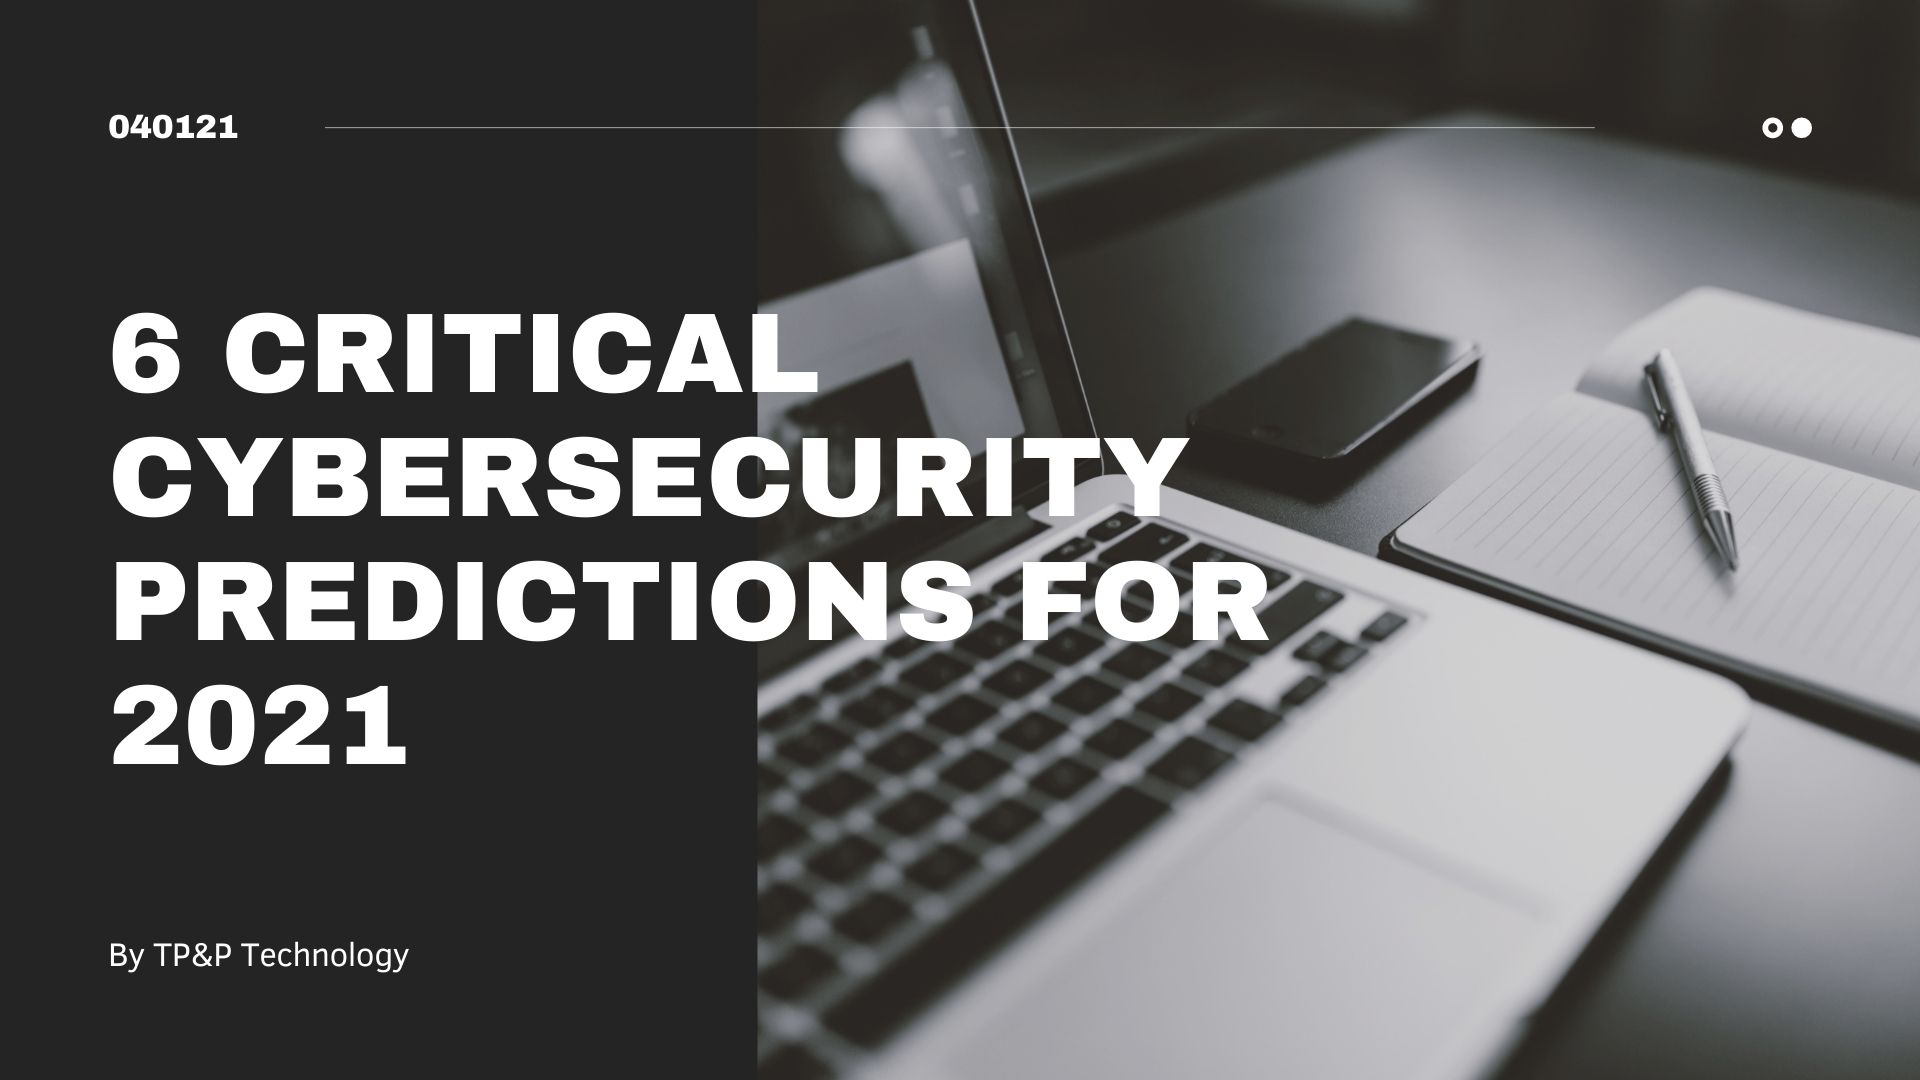 6 Critical Cybersecurity Predictions For 2021